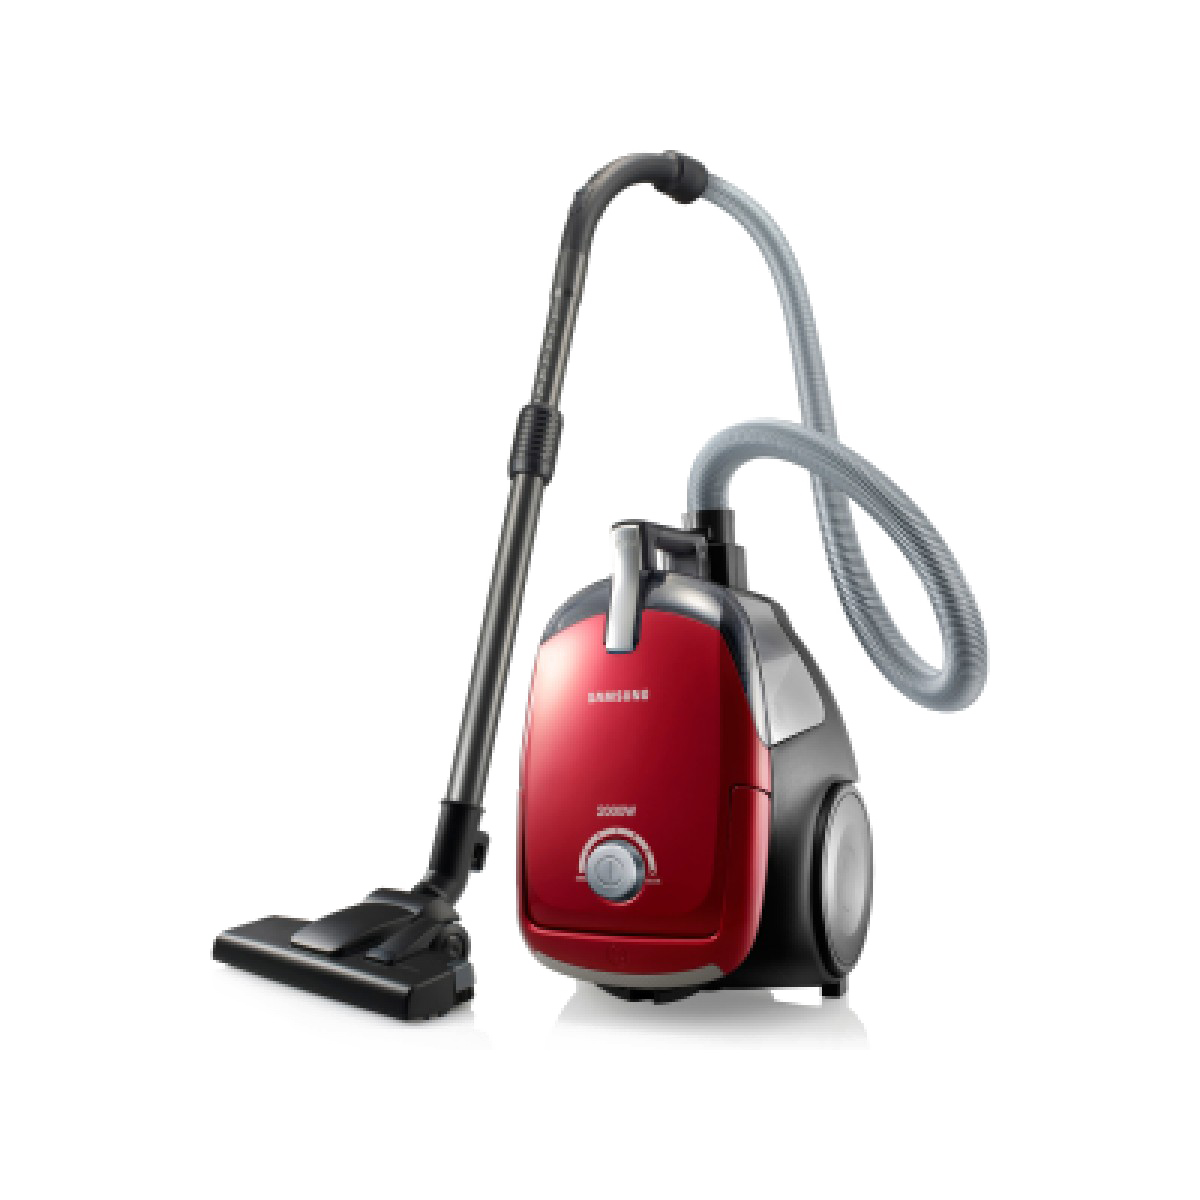 Red Vacuum Cleaner PNG Image With Transparent Background